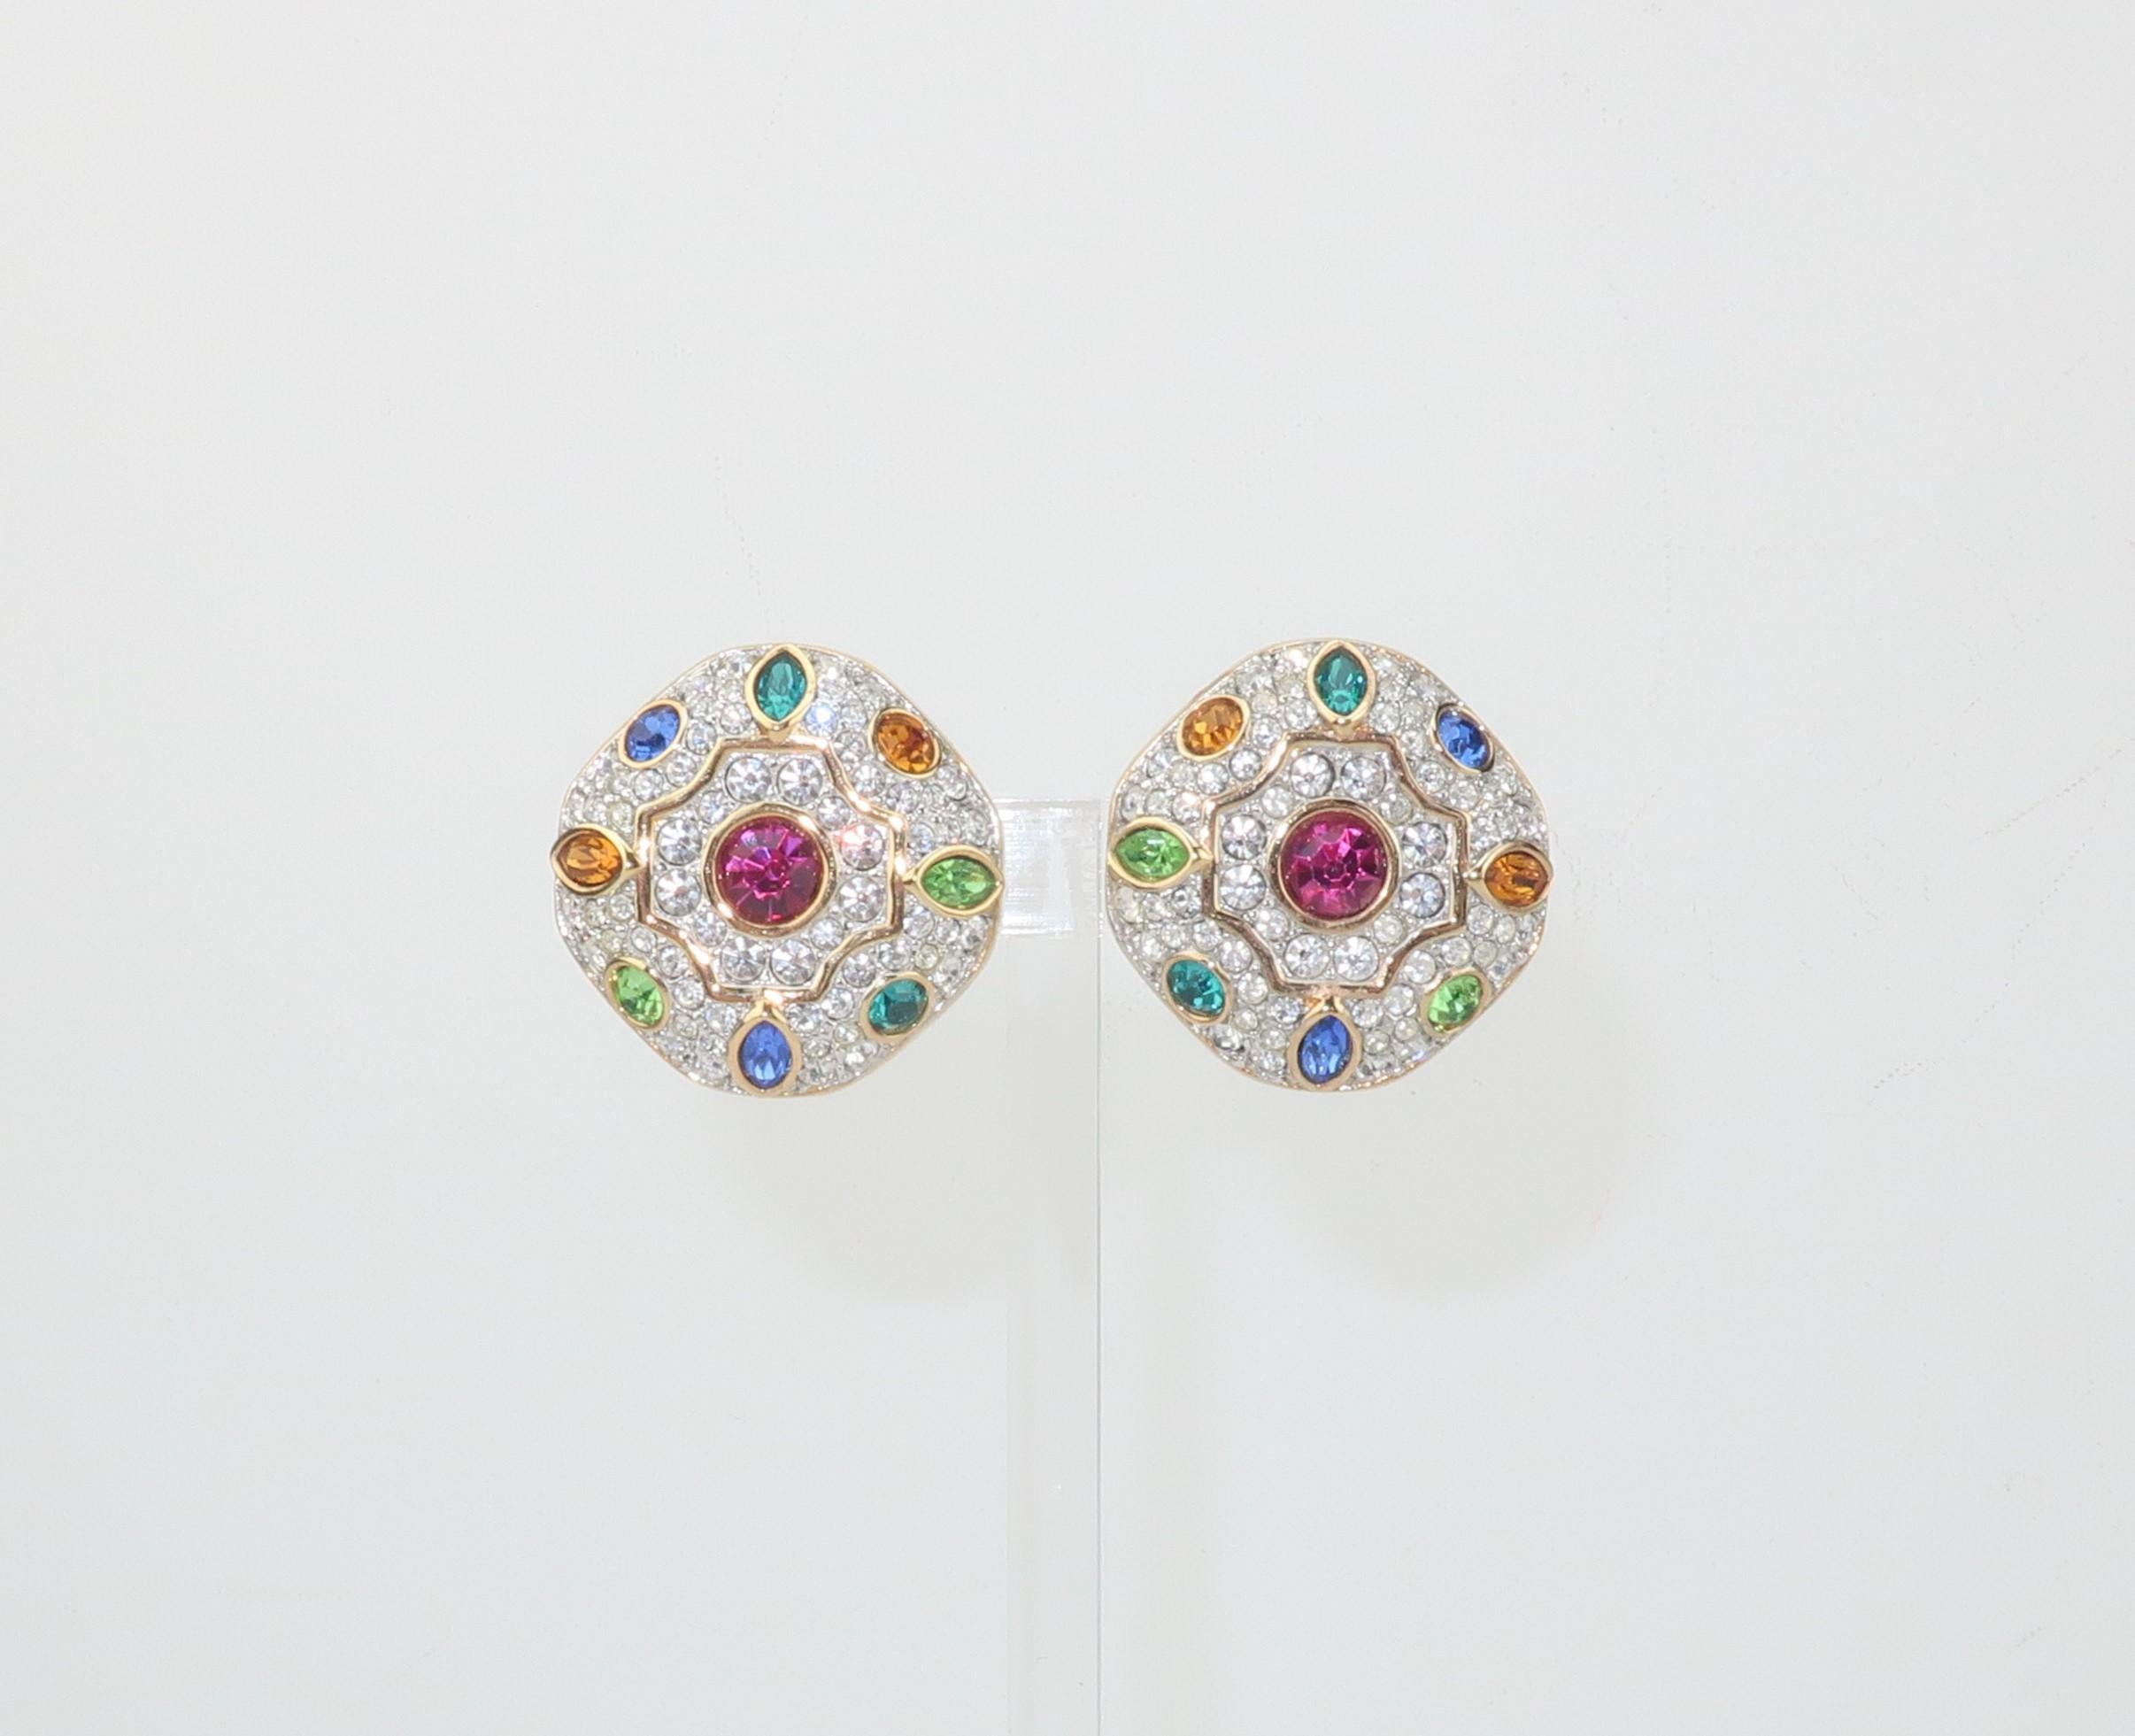 A beautiful pair of gold tone earrings embellished with Swarovski sparkling crystal rhinestones in multi color shades of ruby red, sapphire blue, aquamarine, citrine yellow and peridot green.  Outfitted with clip on hardware and signed with the